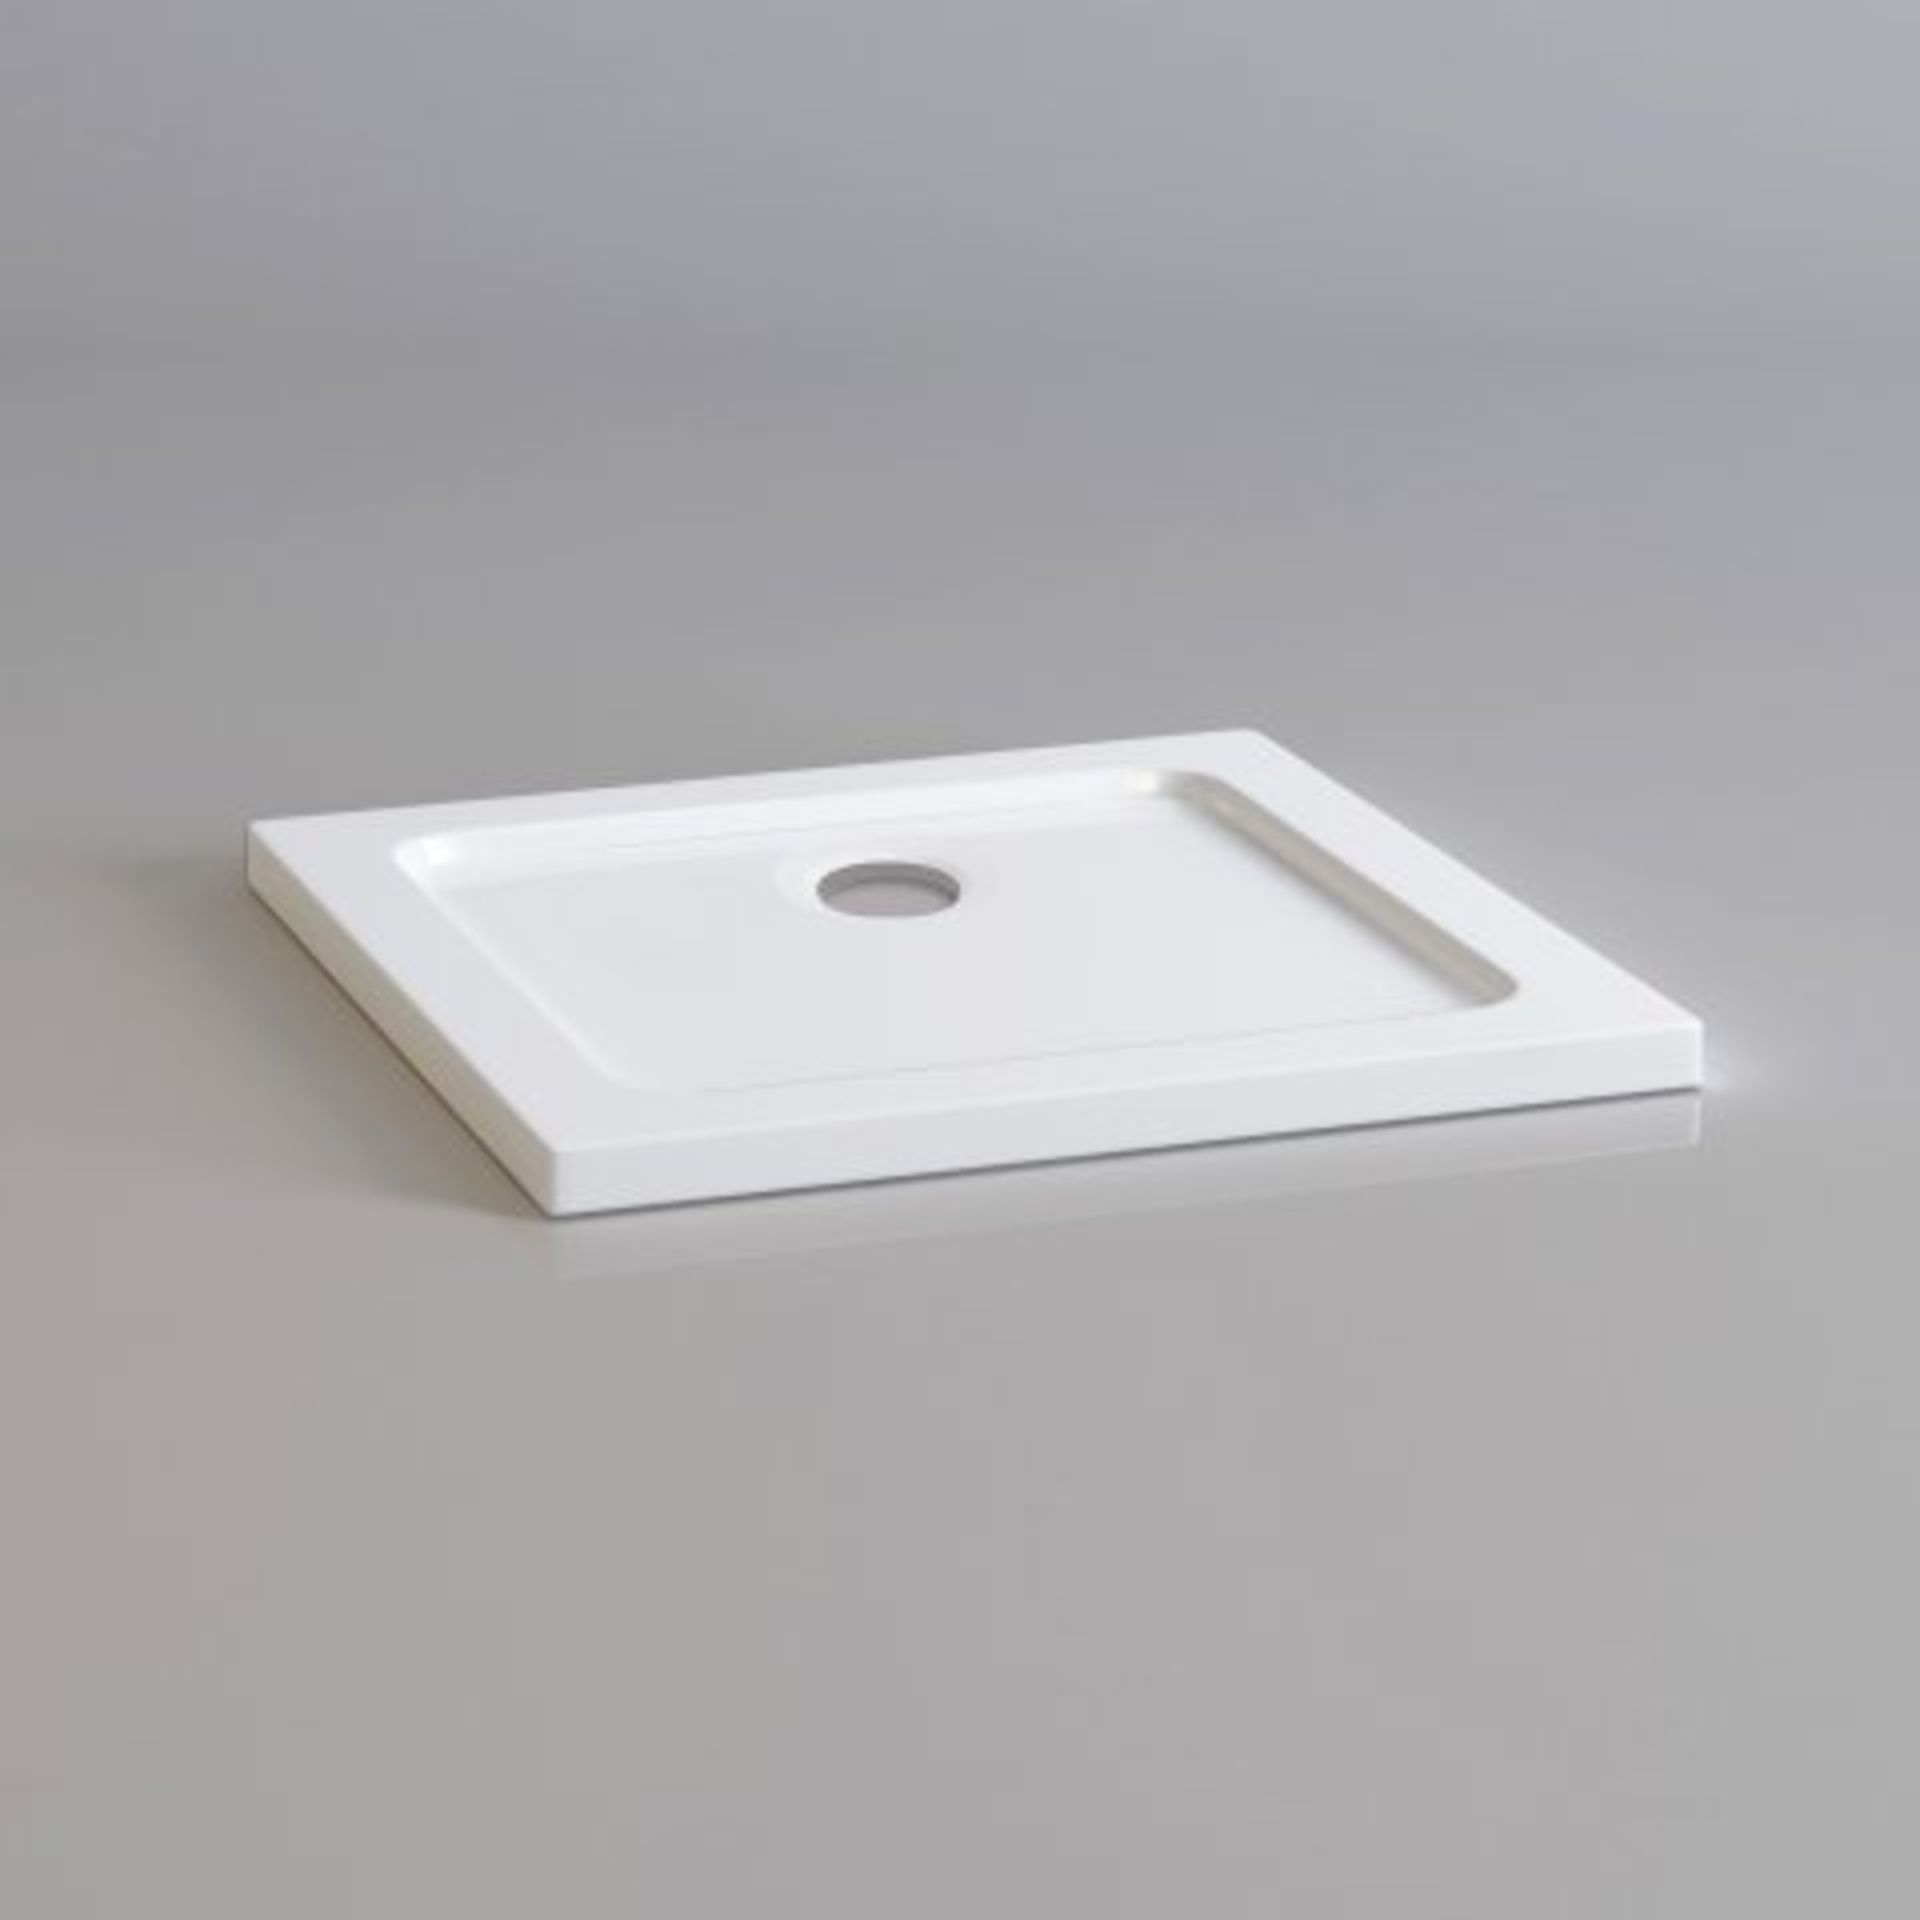 (T46) 1000x1000mm Square Ultra Slim Stone Shower Tray. RRP £199.99. Designed and made carefully to